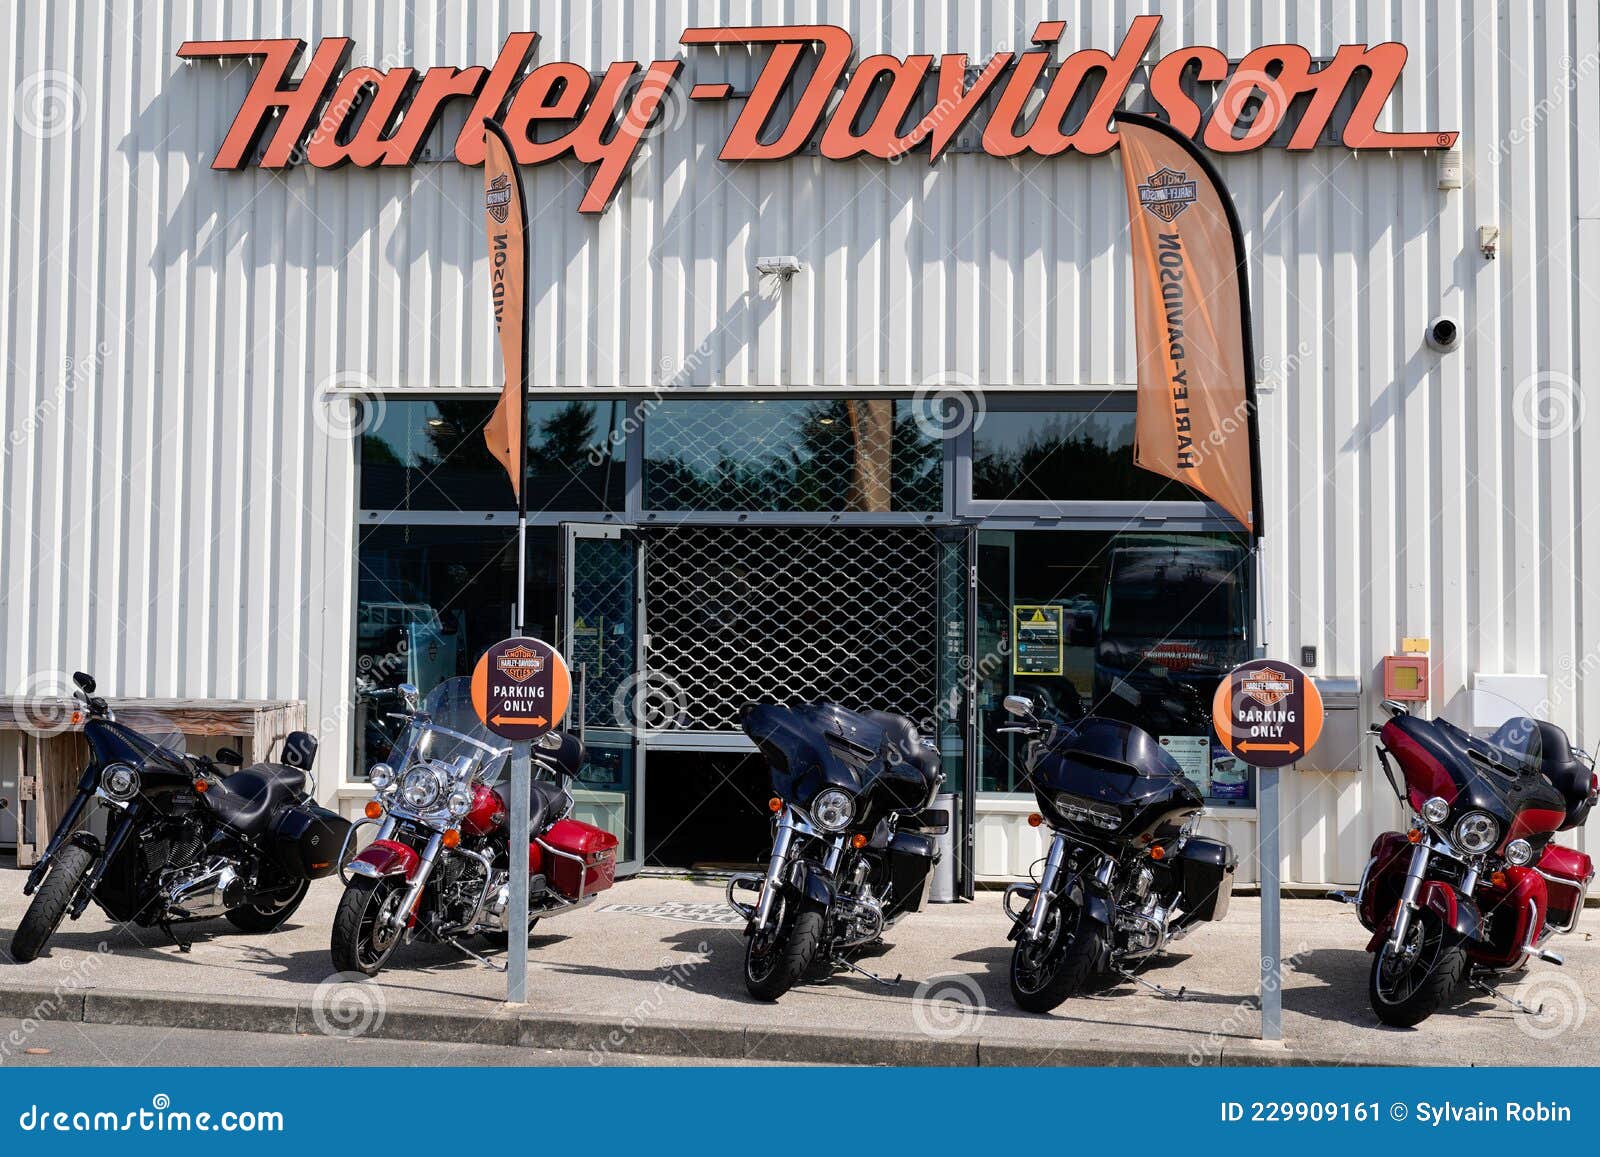 389 Harley Davidson Store Photos Free Royalty Free Stock Photos From Dreamstime